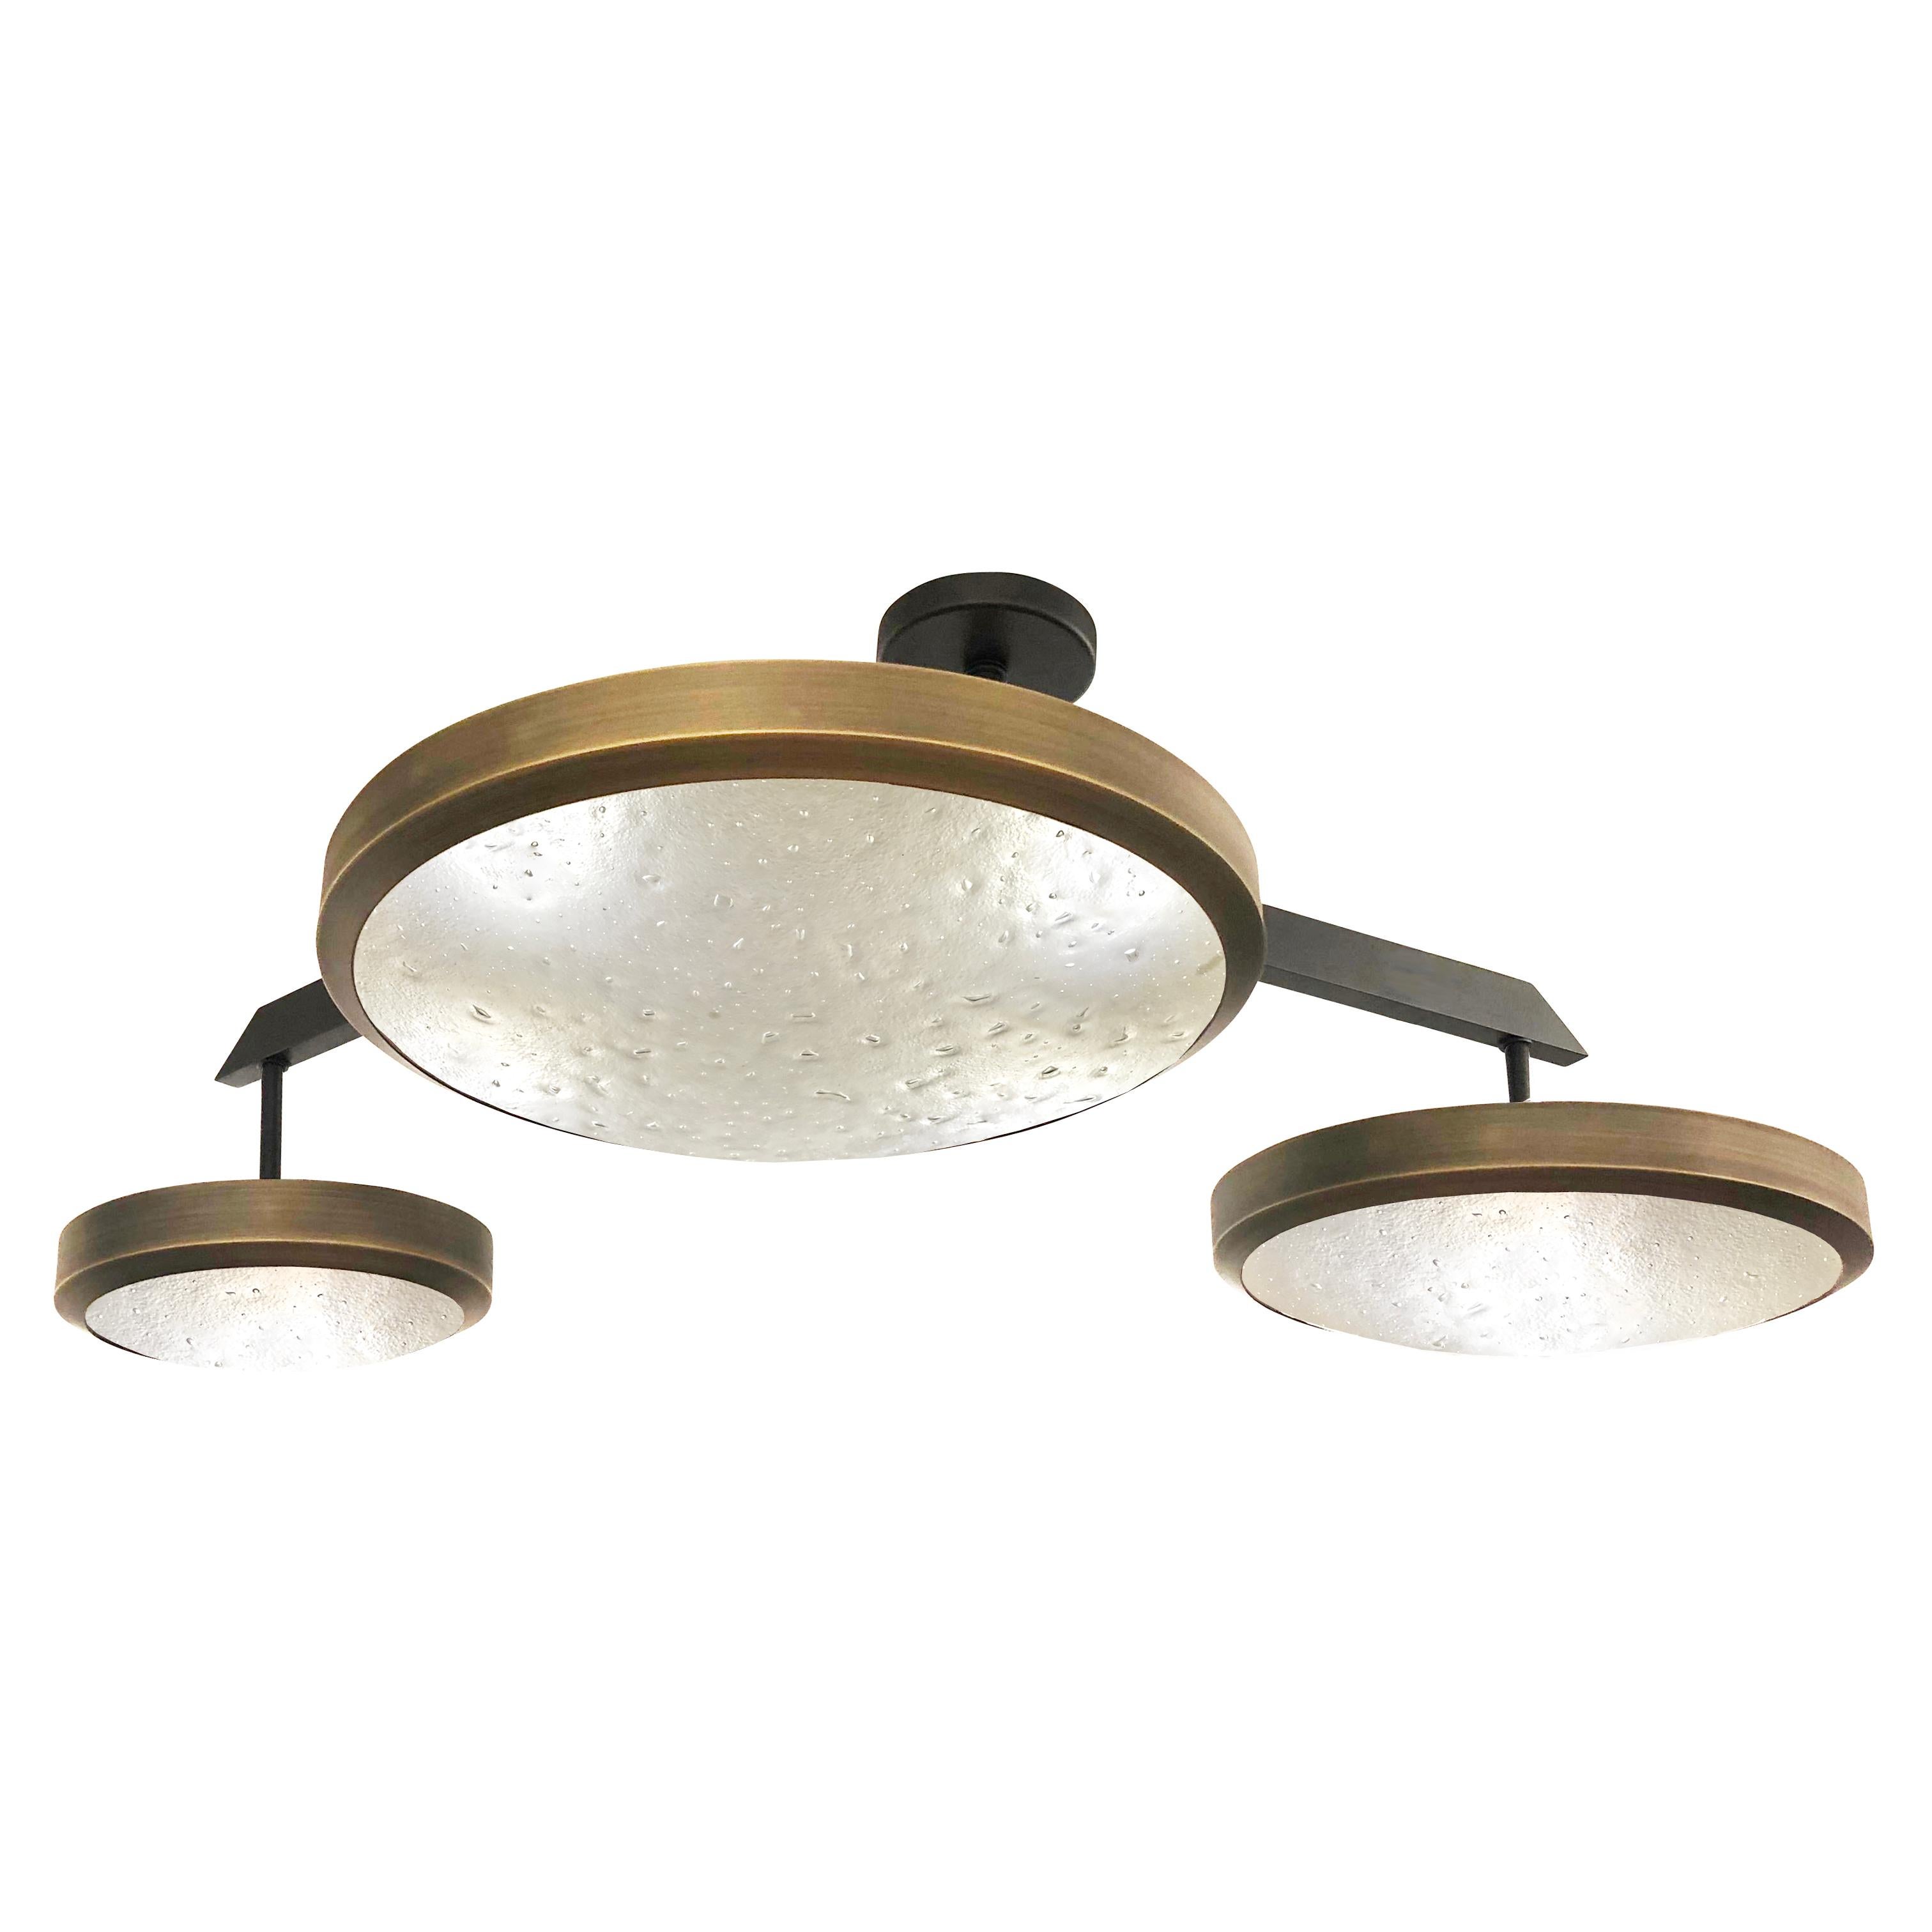 The Zeta ceiling by form A light features a composition of variable sized Murano glass shades methodically balanced on a “V” shaped brass frame. The first images show the fixture in a two-tone finish-subsequent pictures show it in a selection of